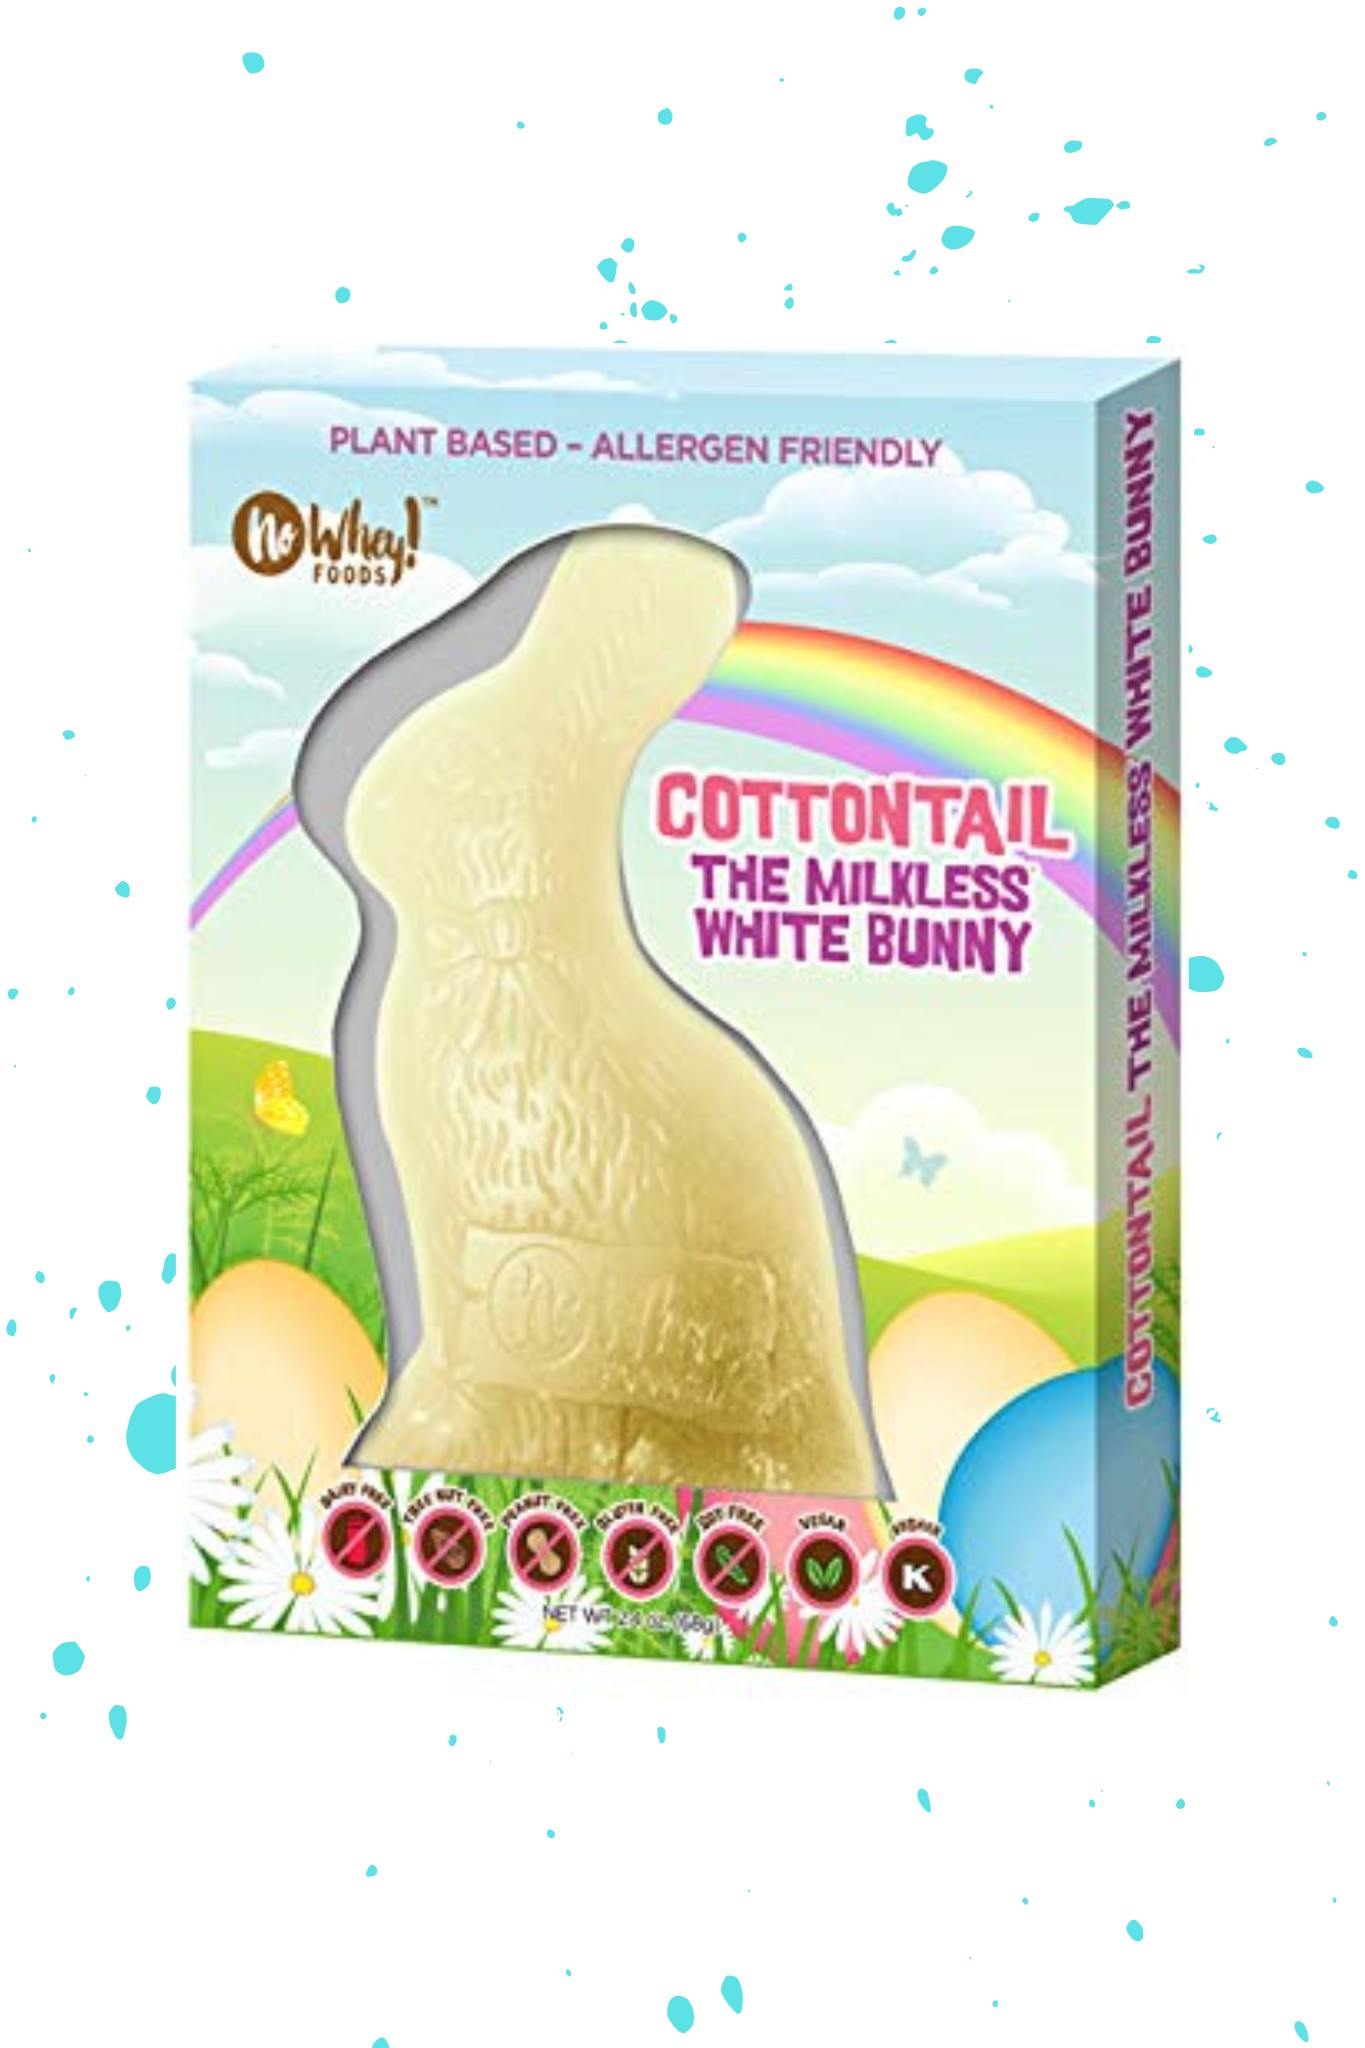 A No Whey white chocolate Easter bunny that is allergy-friendly.